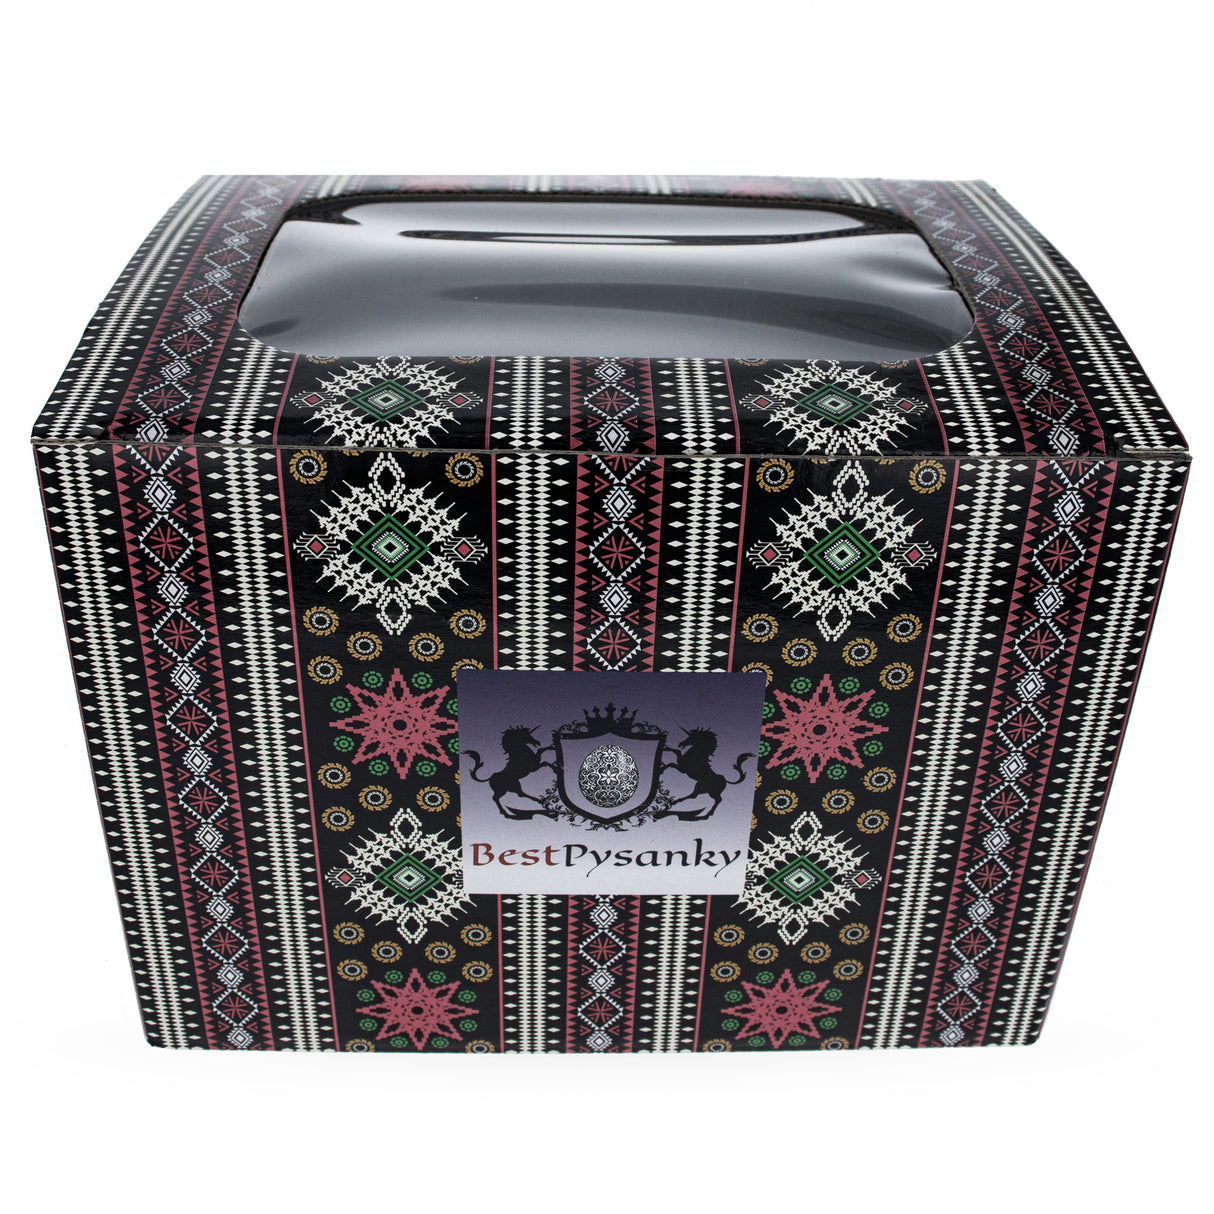 Shop Geometric Design Ukrainian Gift Box with Display Window 7.1 x 5.5 x 5.5 Inches. Buy Red color Paper Crafts Boxes for Sale by Online Gift Shop BestPysanky